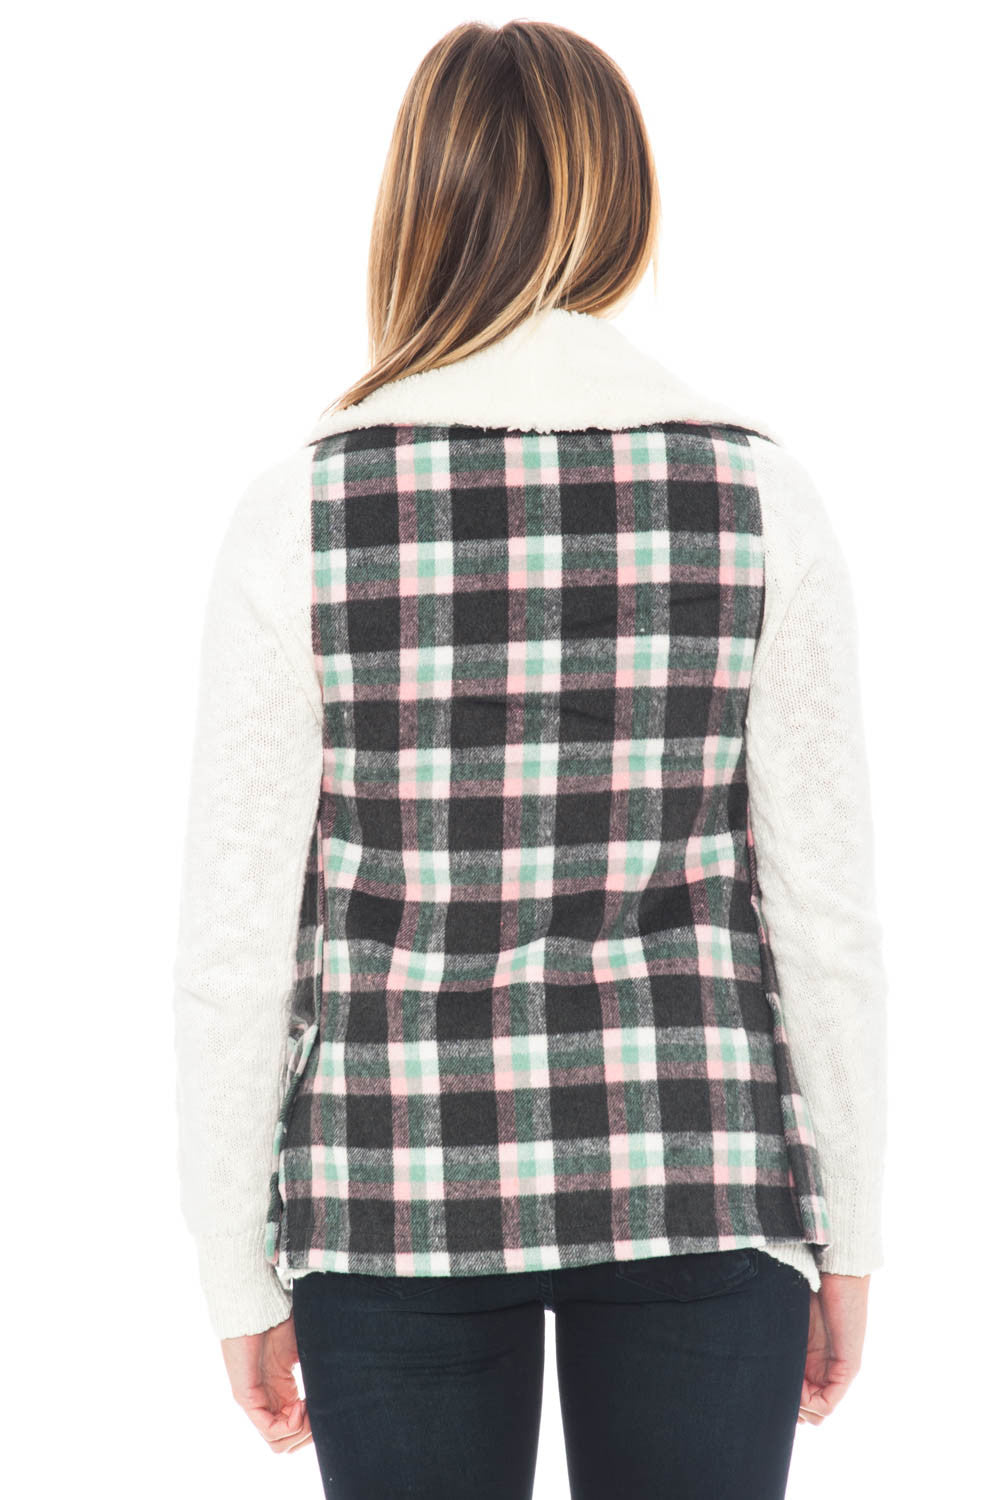 Vest - Plaid Print Sherpa Inset and Pockets (Final Sale)